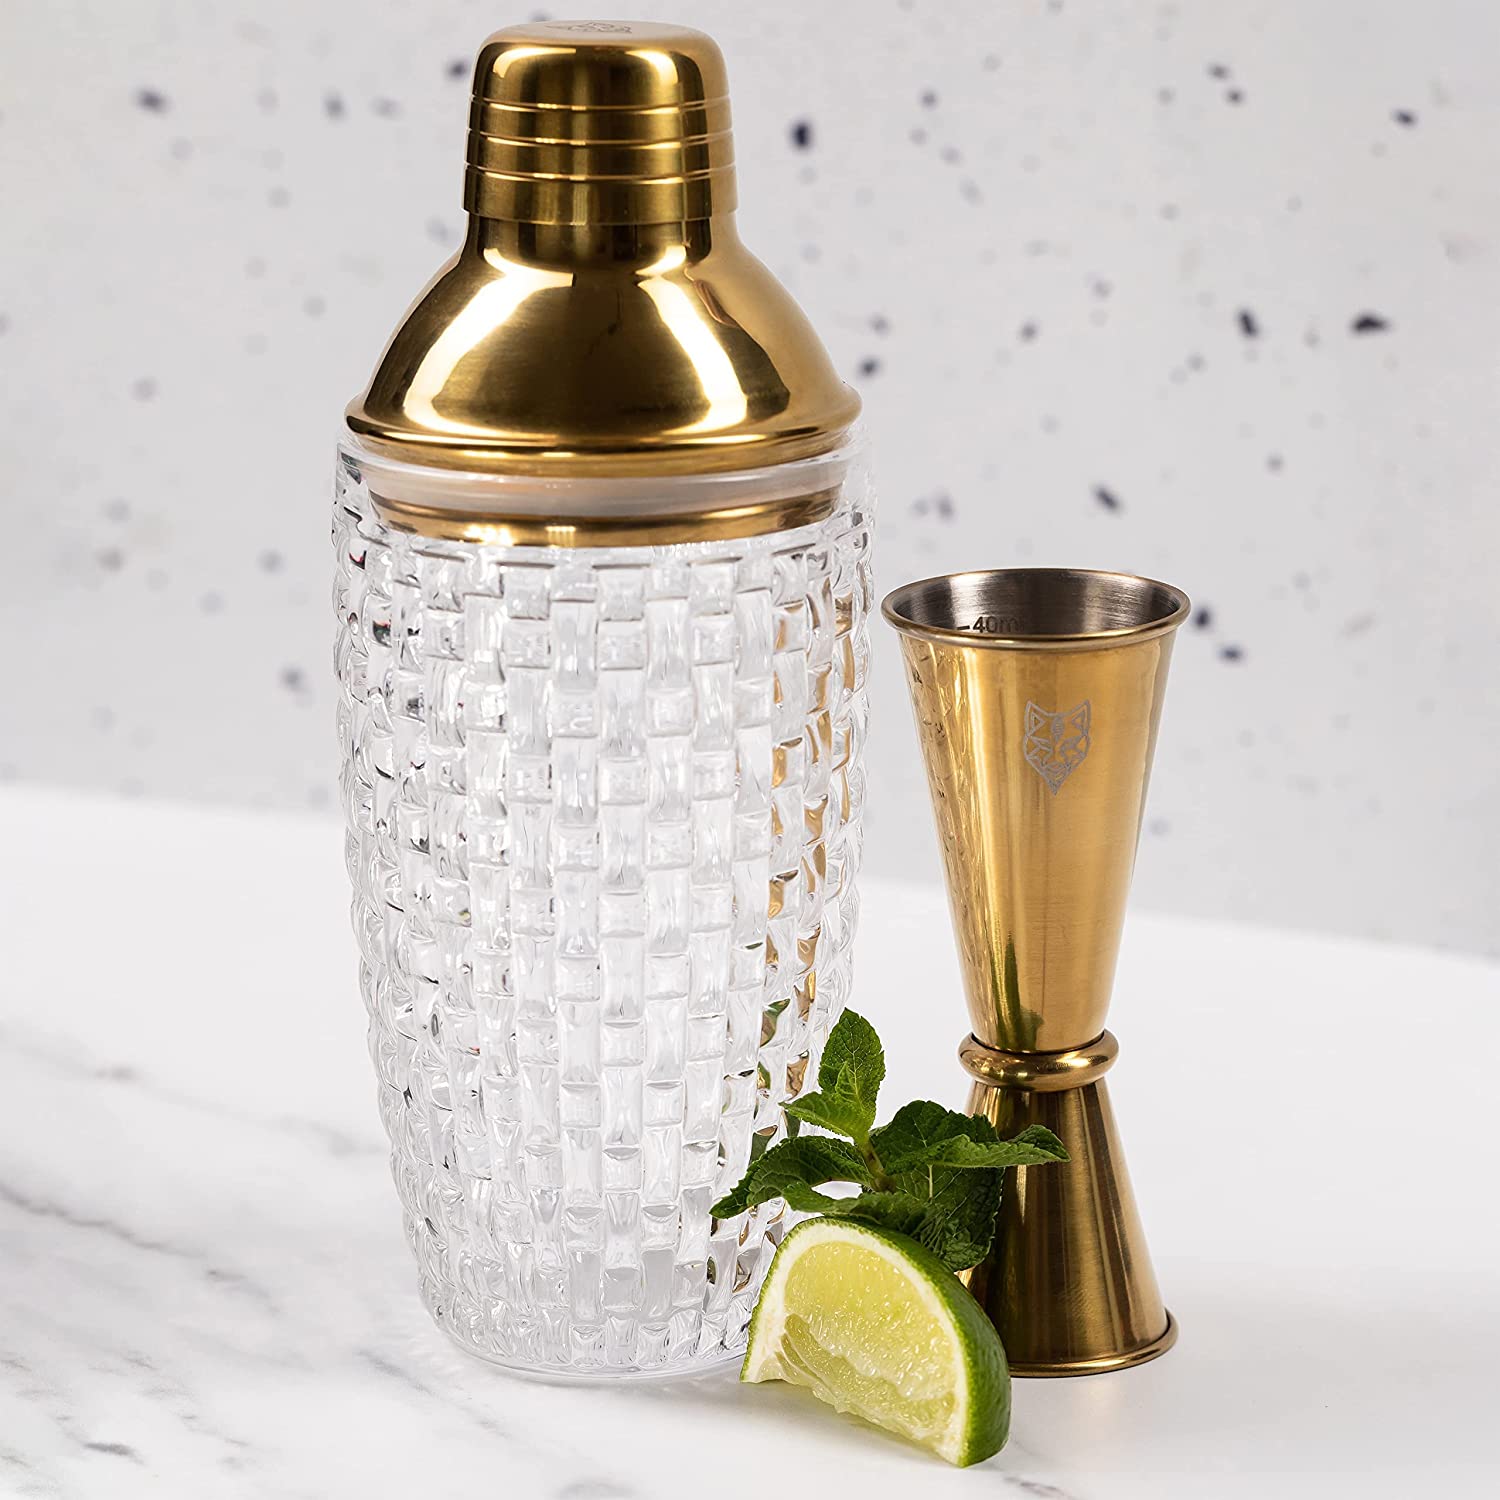 Gold Cocktail Making Set with Glass Cocktail Shaker and Jigger